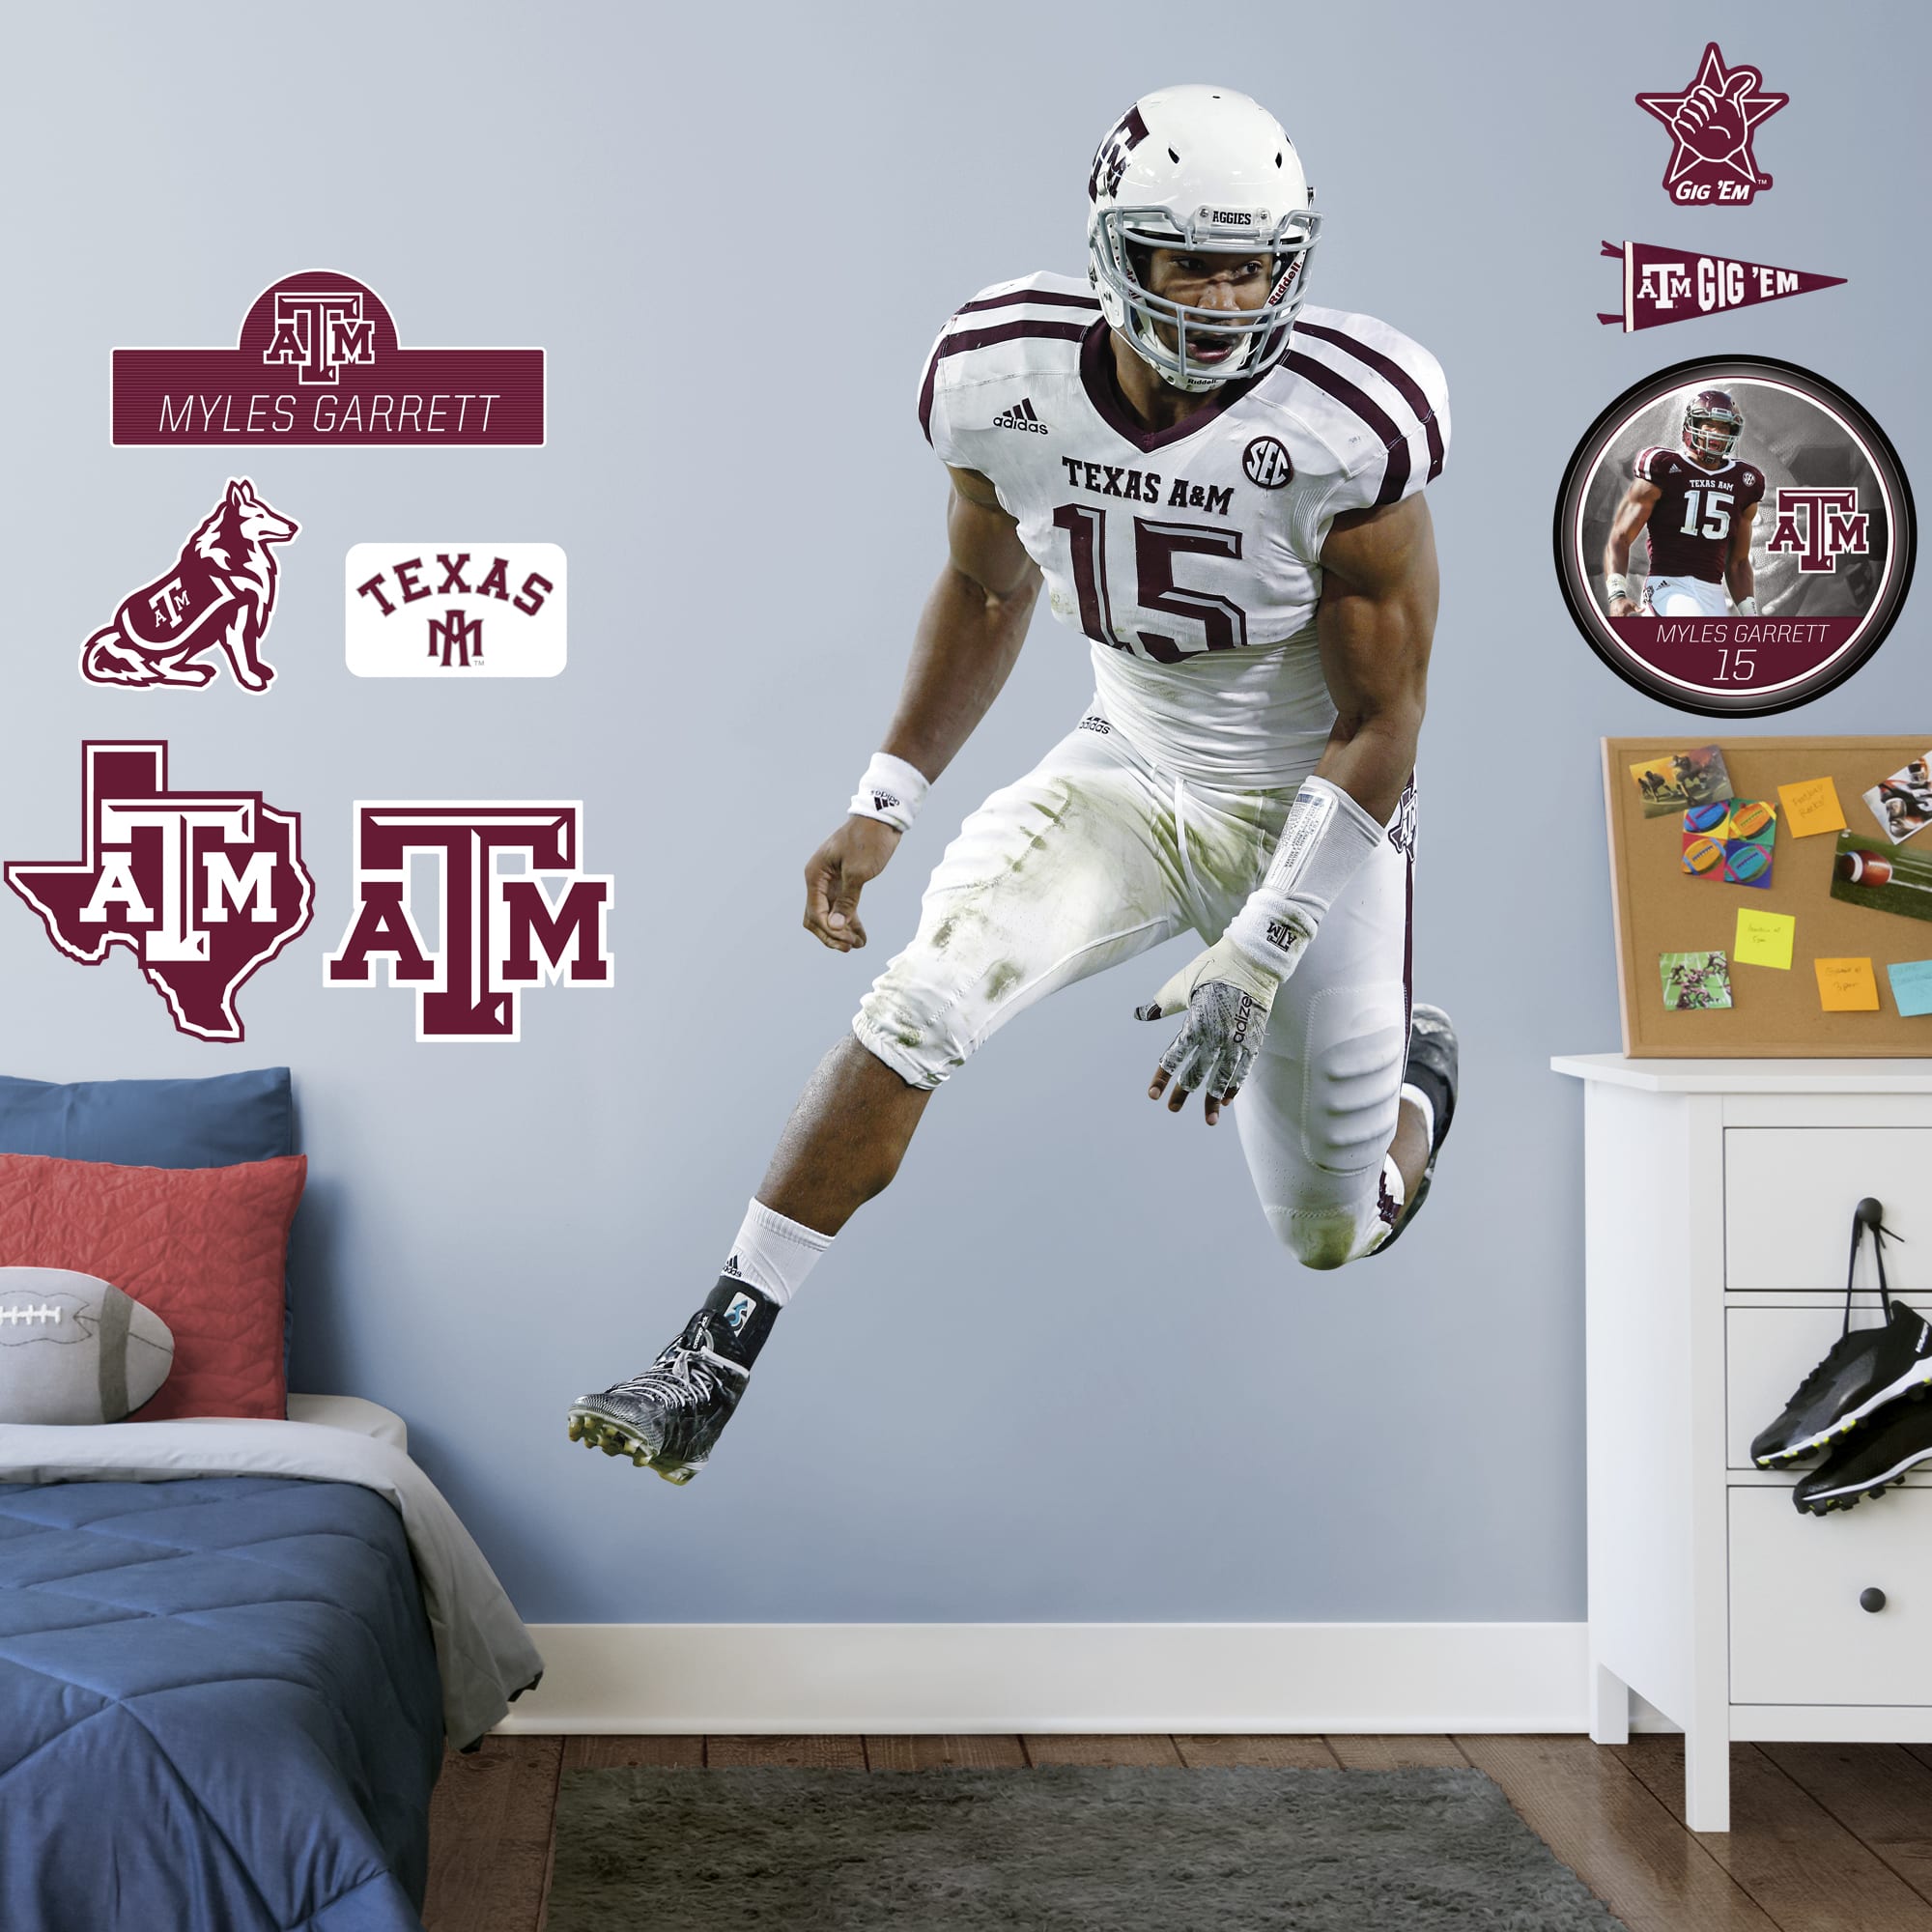 Myles Garrett for Texas A&M Aggies: Texas A&M - Officially Licensed Removable Wall Decal Life-Size Athlete + 2 Decals (49"W x 73